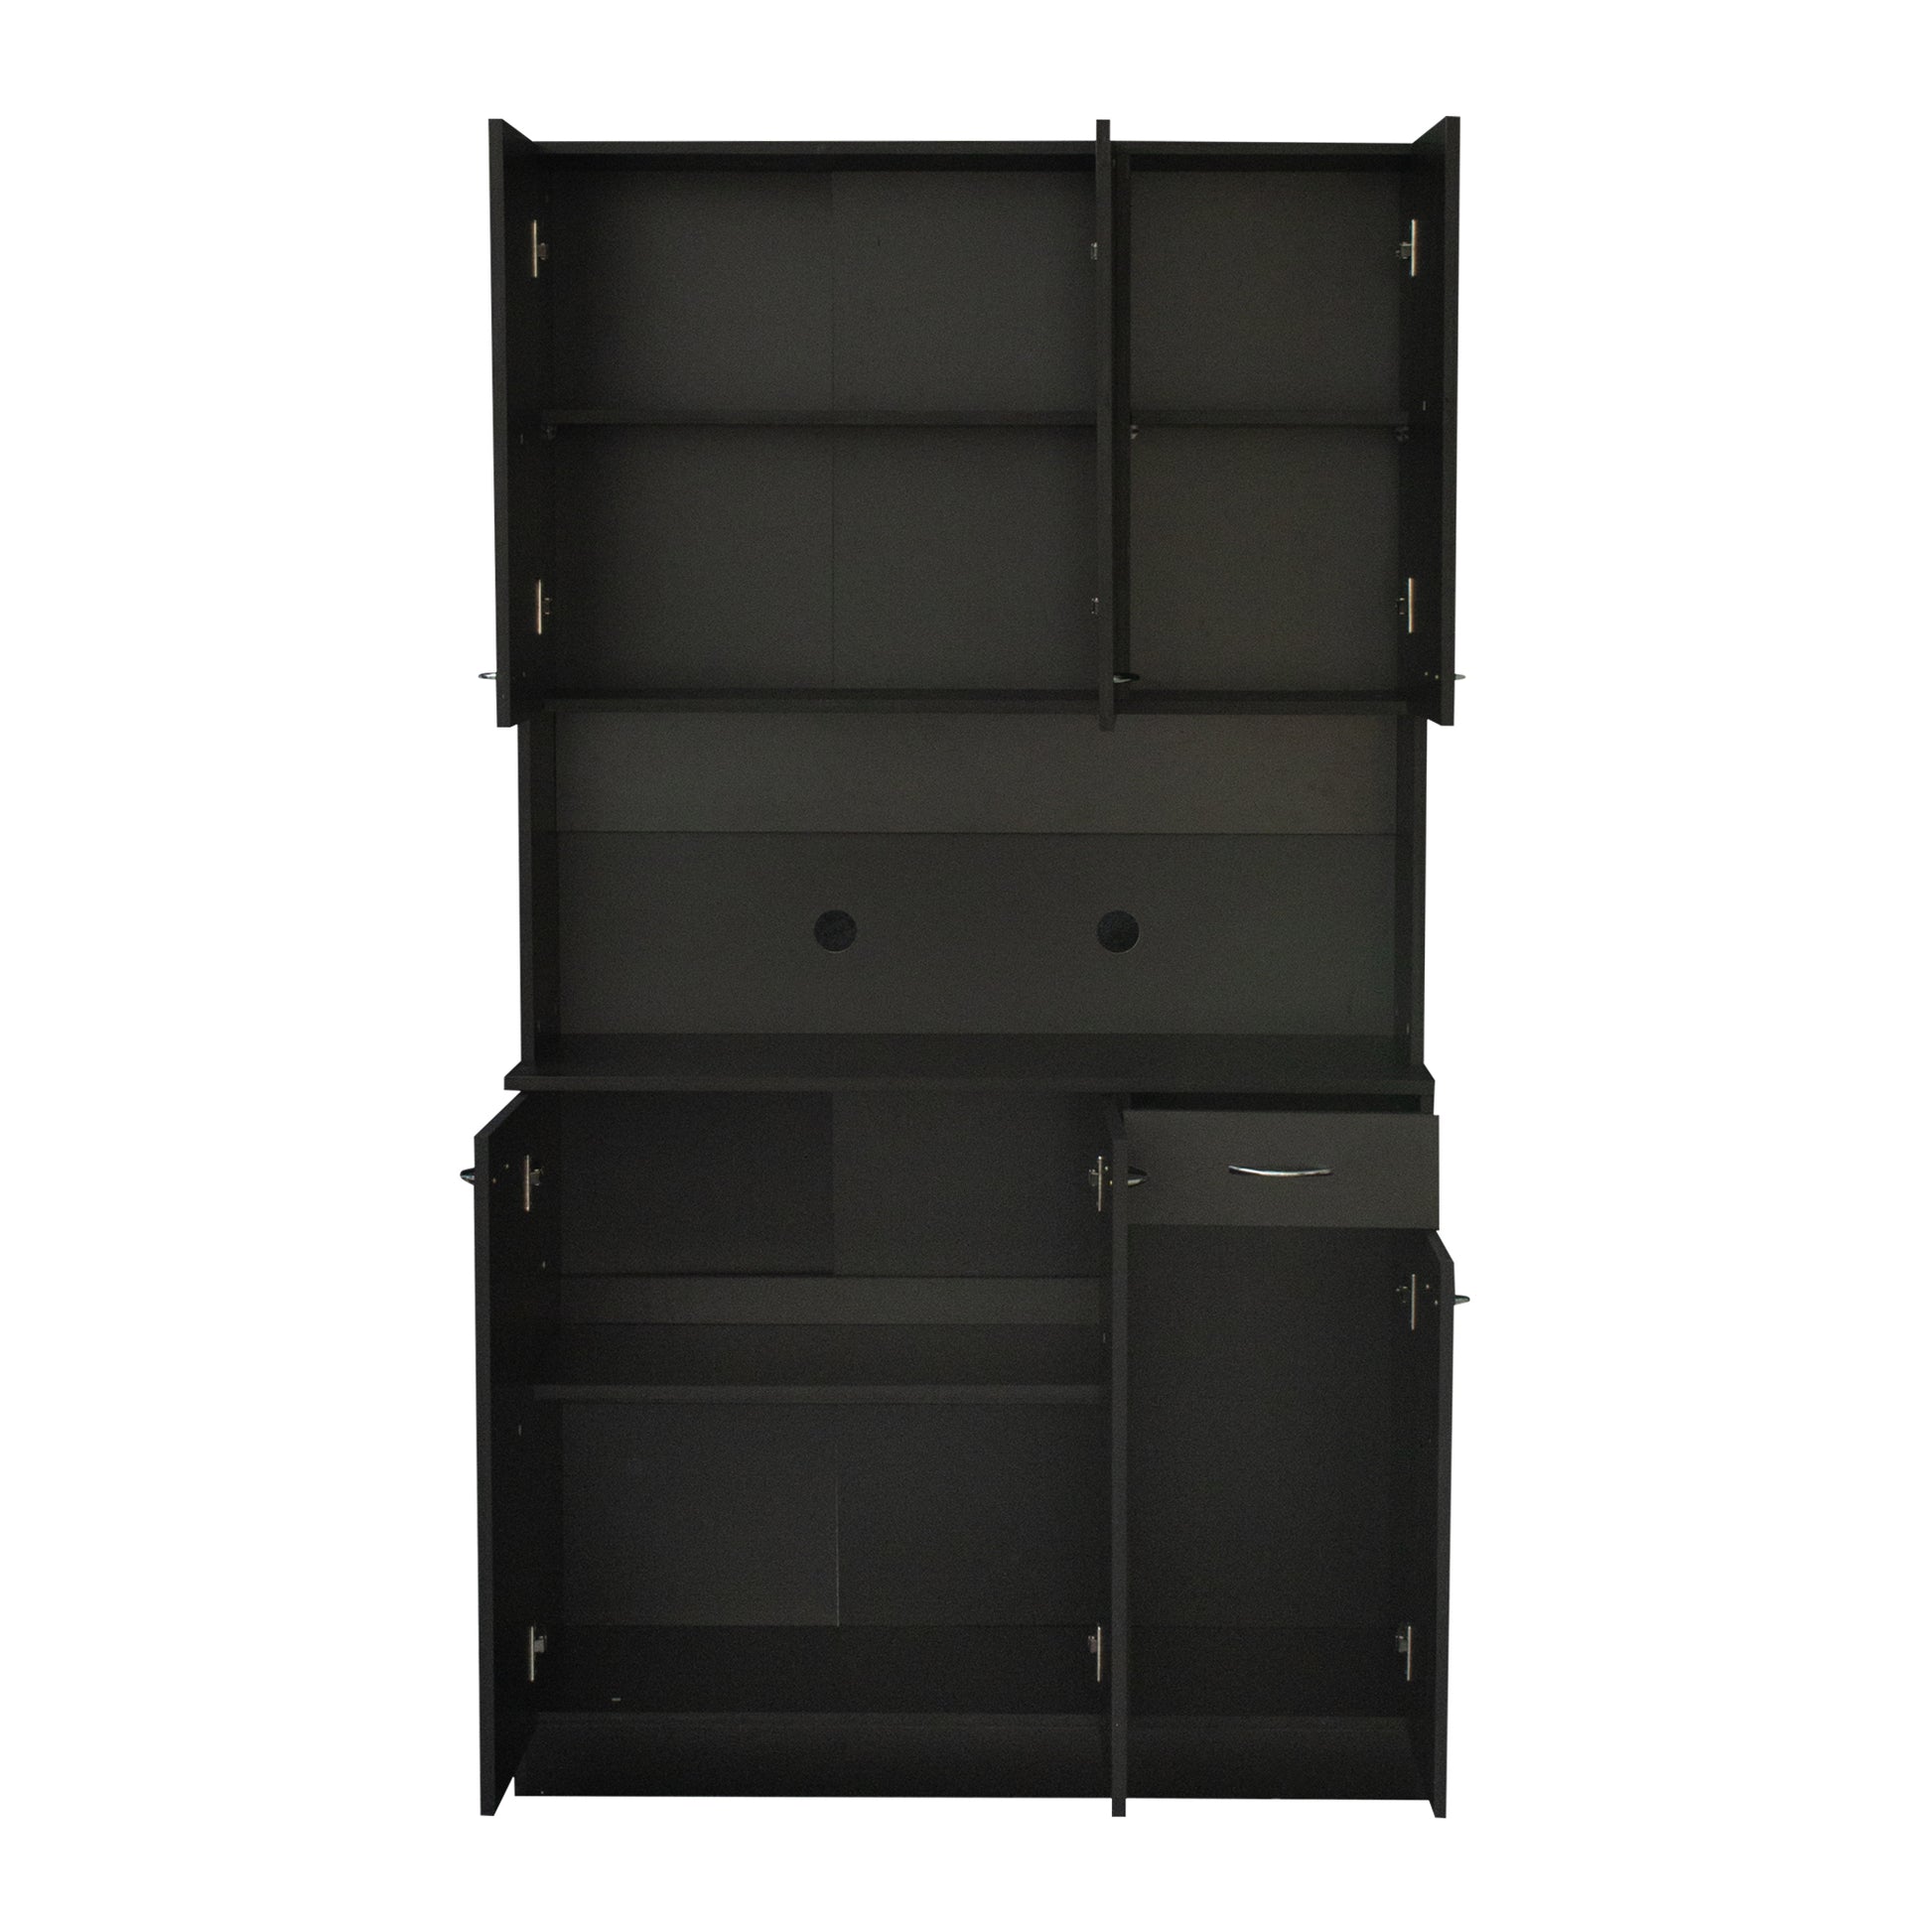 70.87" Tall Wardrobe& Kitchen Cabinet, With 6